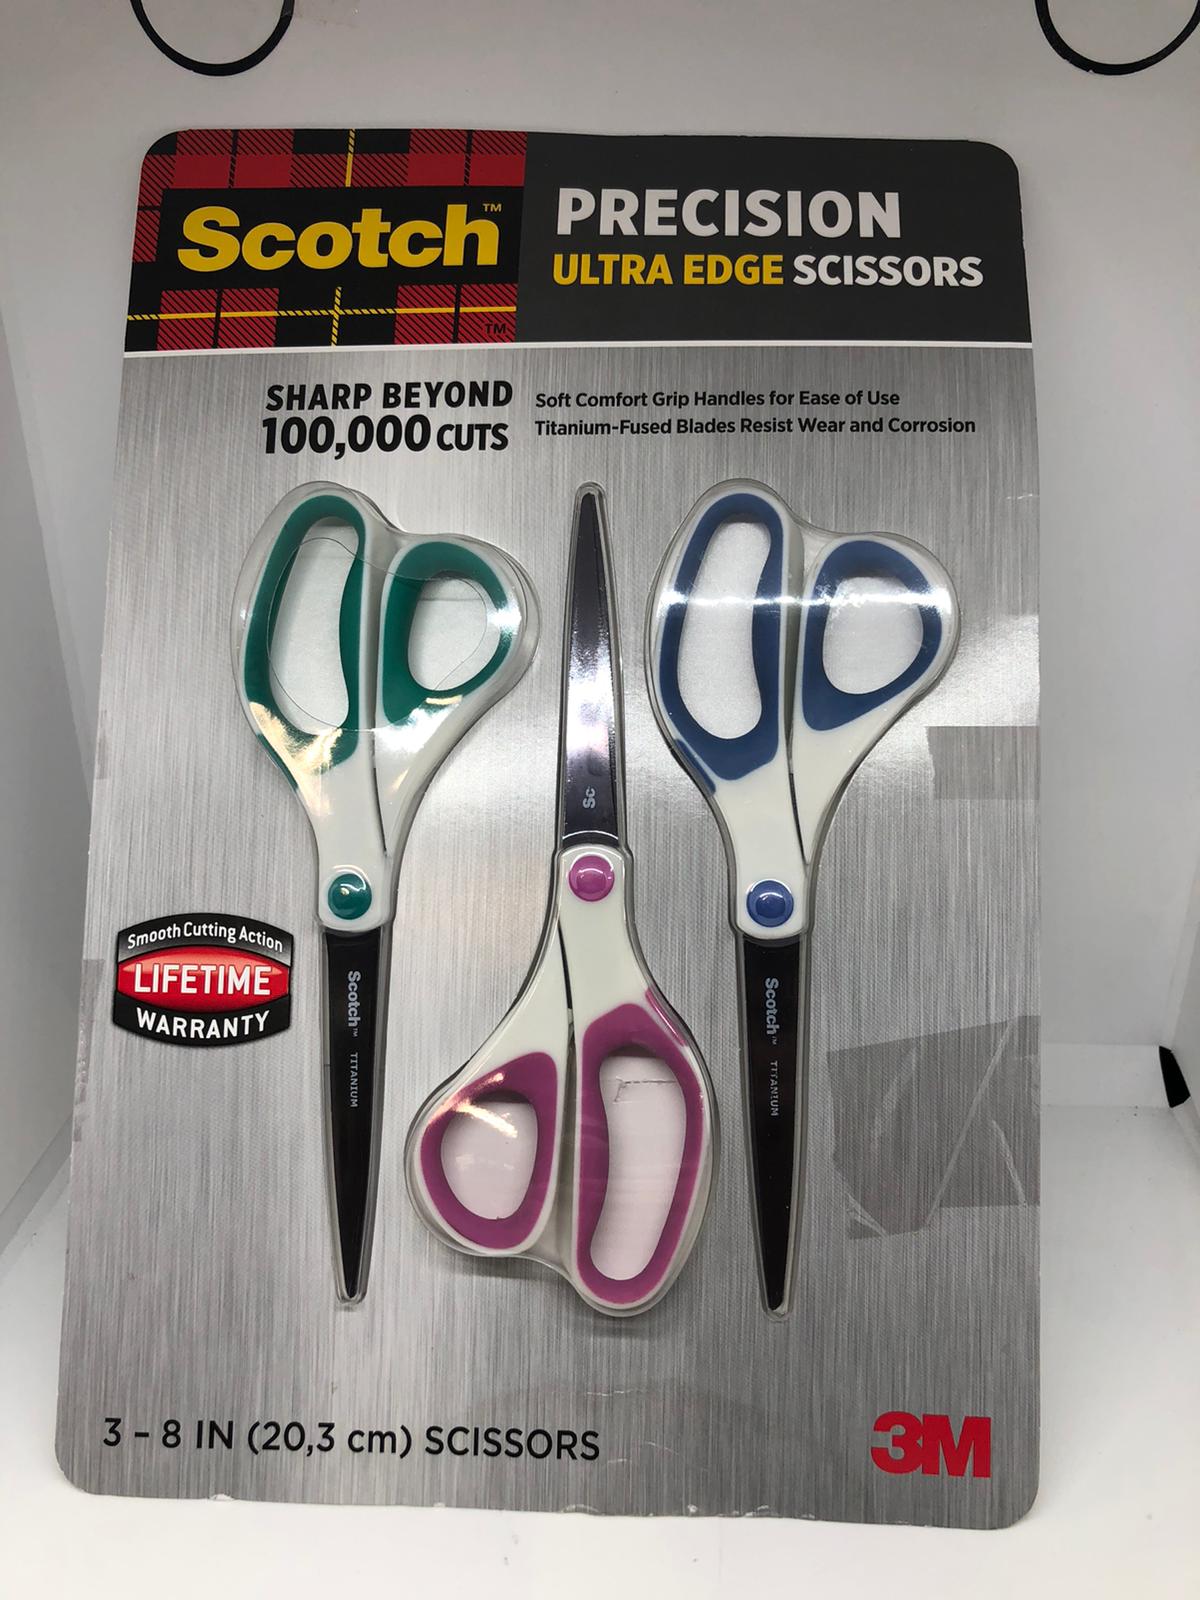 12 Pack: 3M Scotch Household Scissors, Size: 8, Other